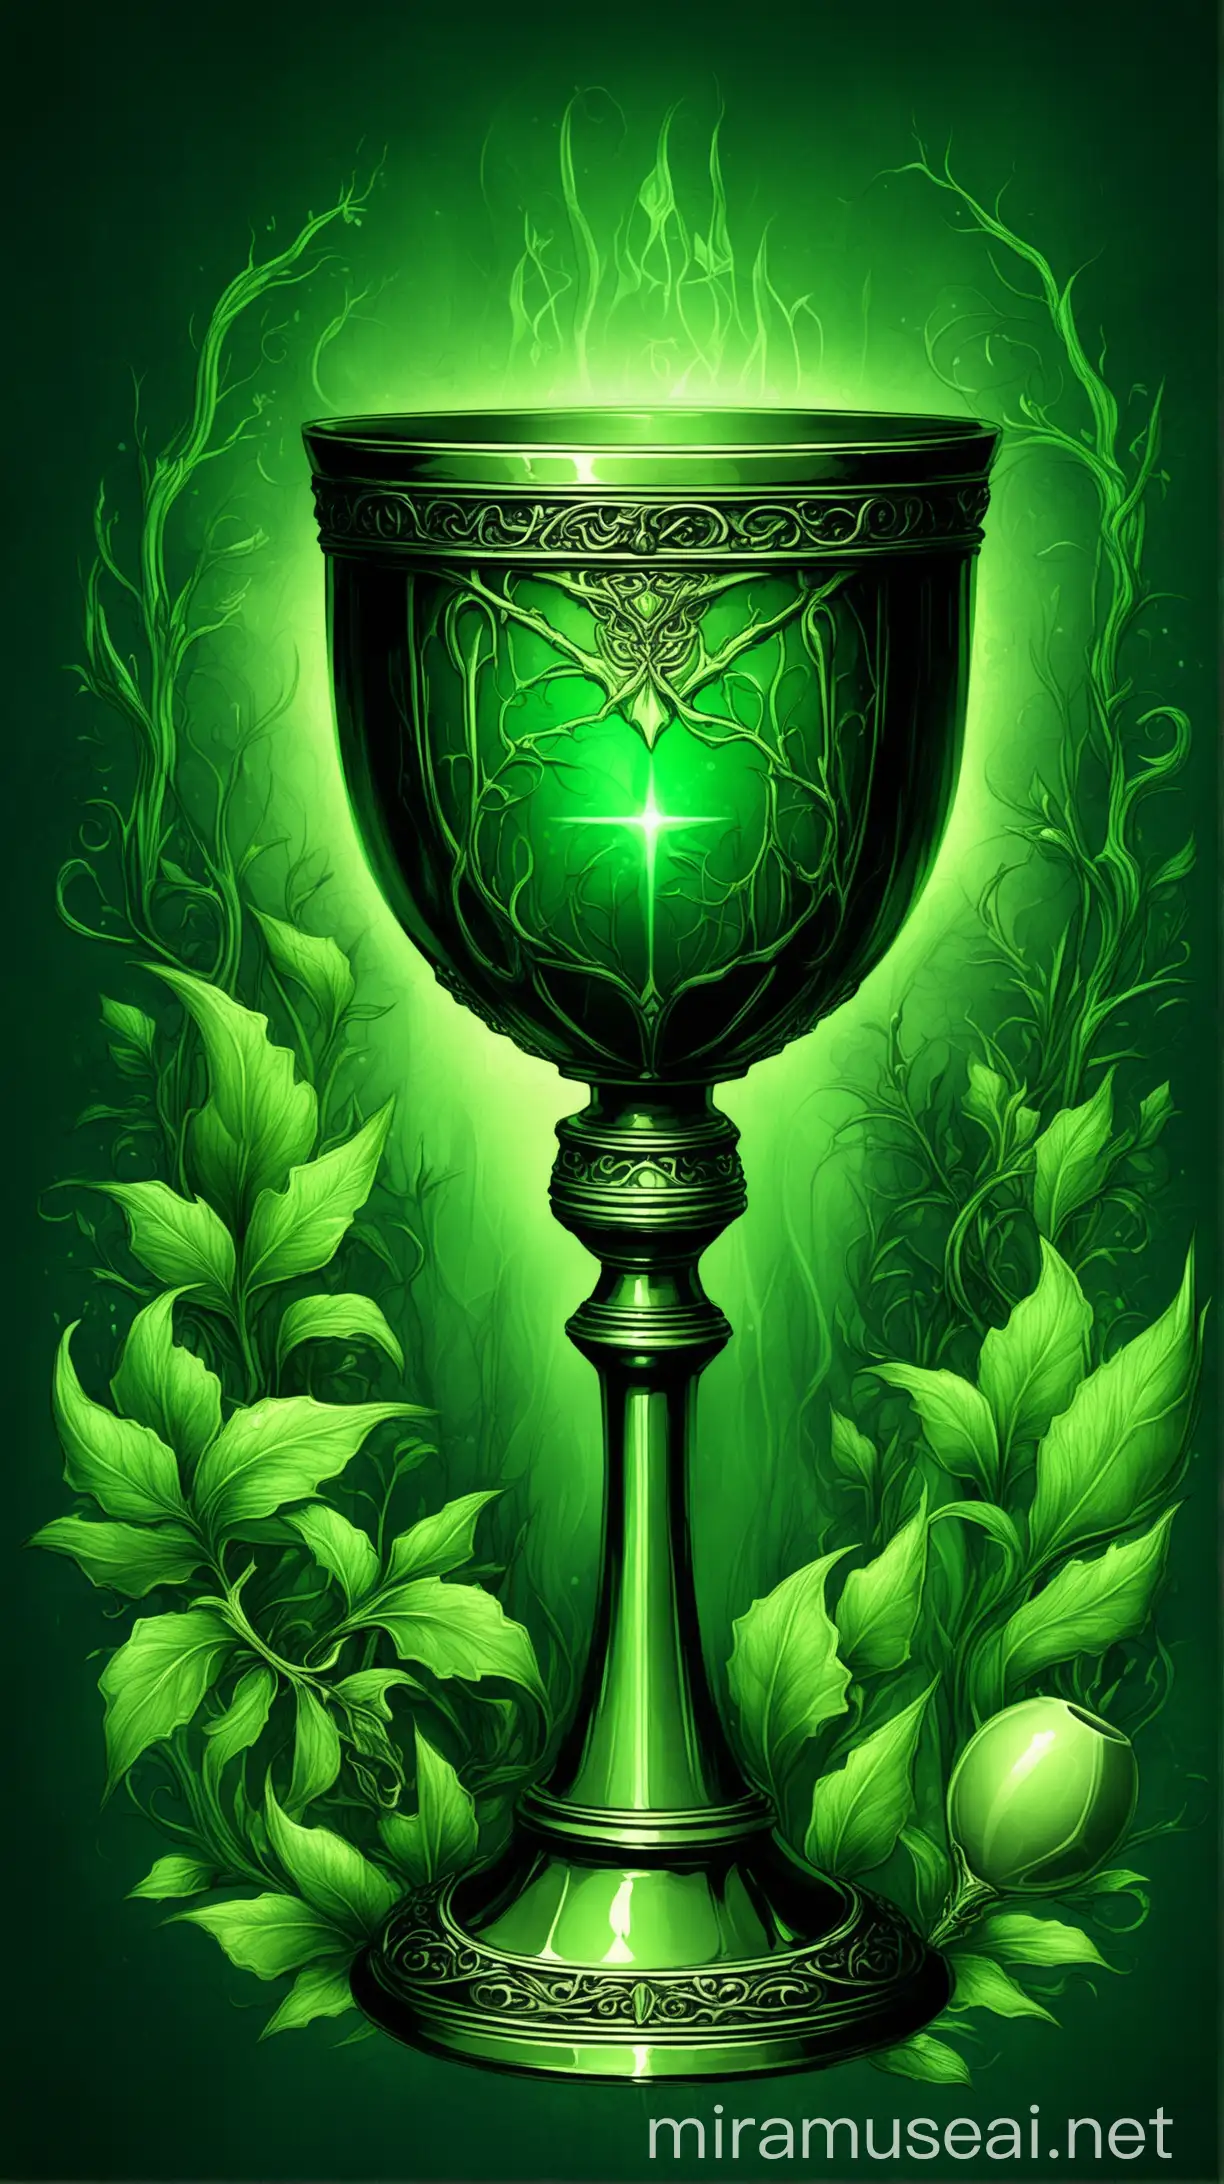 Detailed Mystical Green Goblet on Green Background